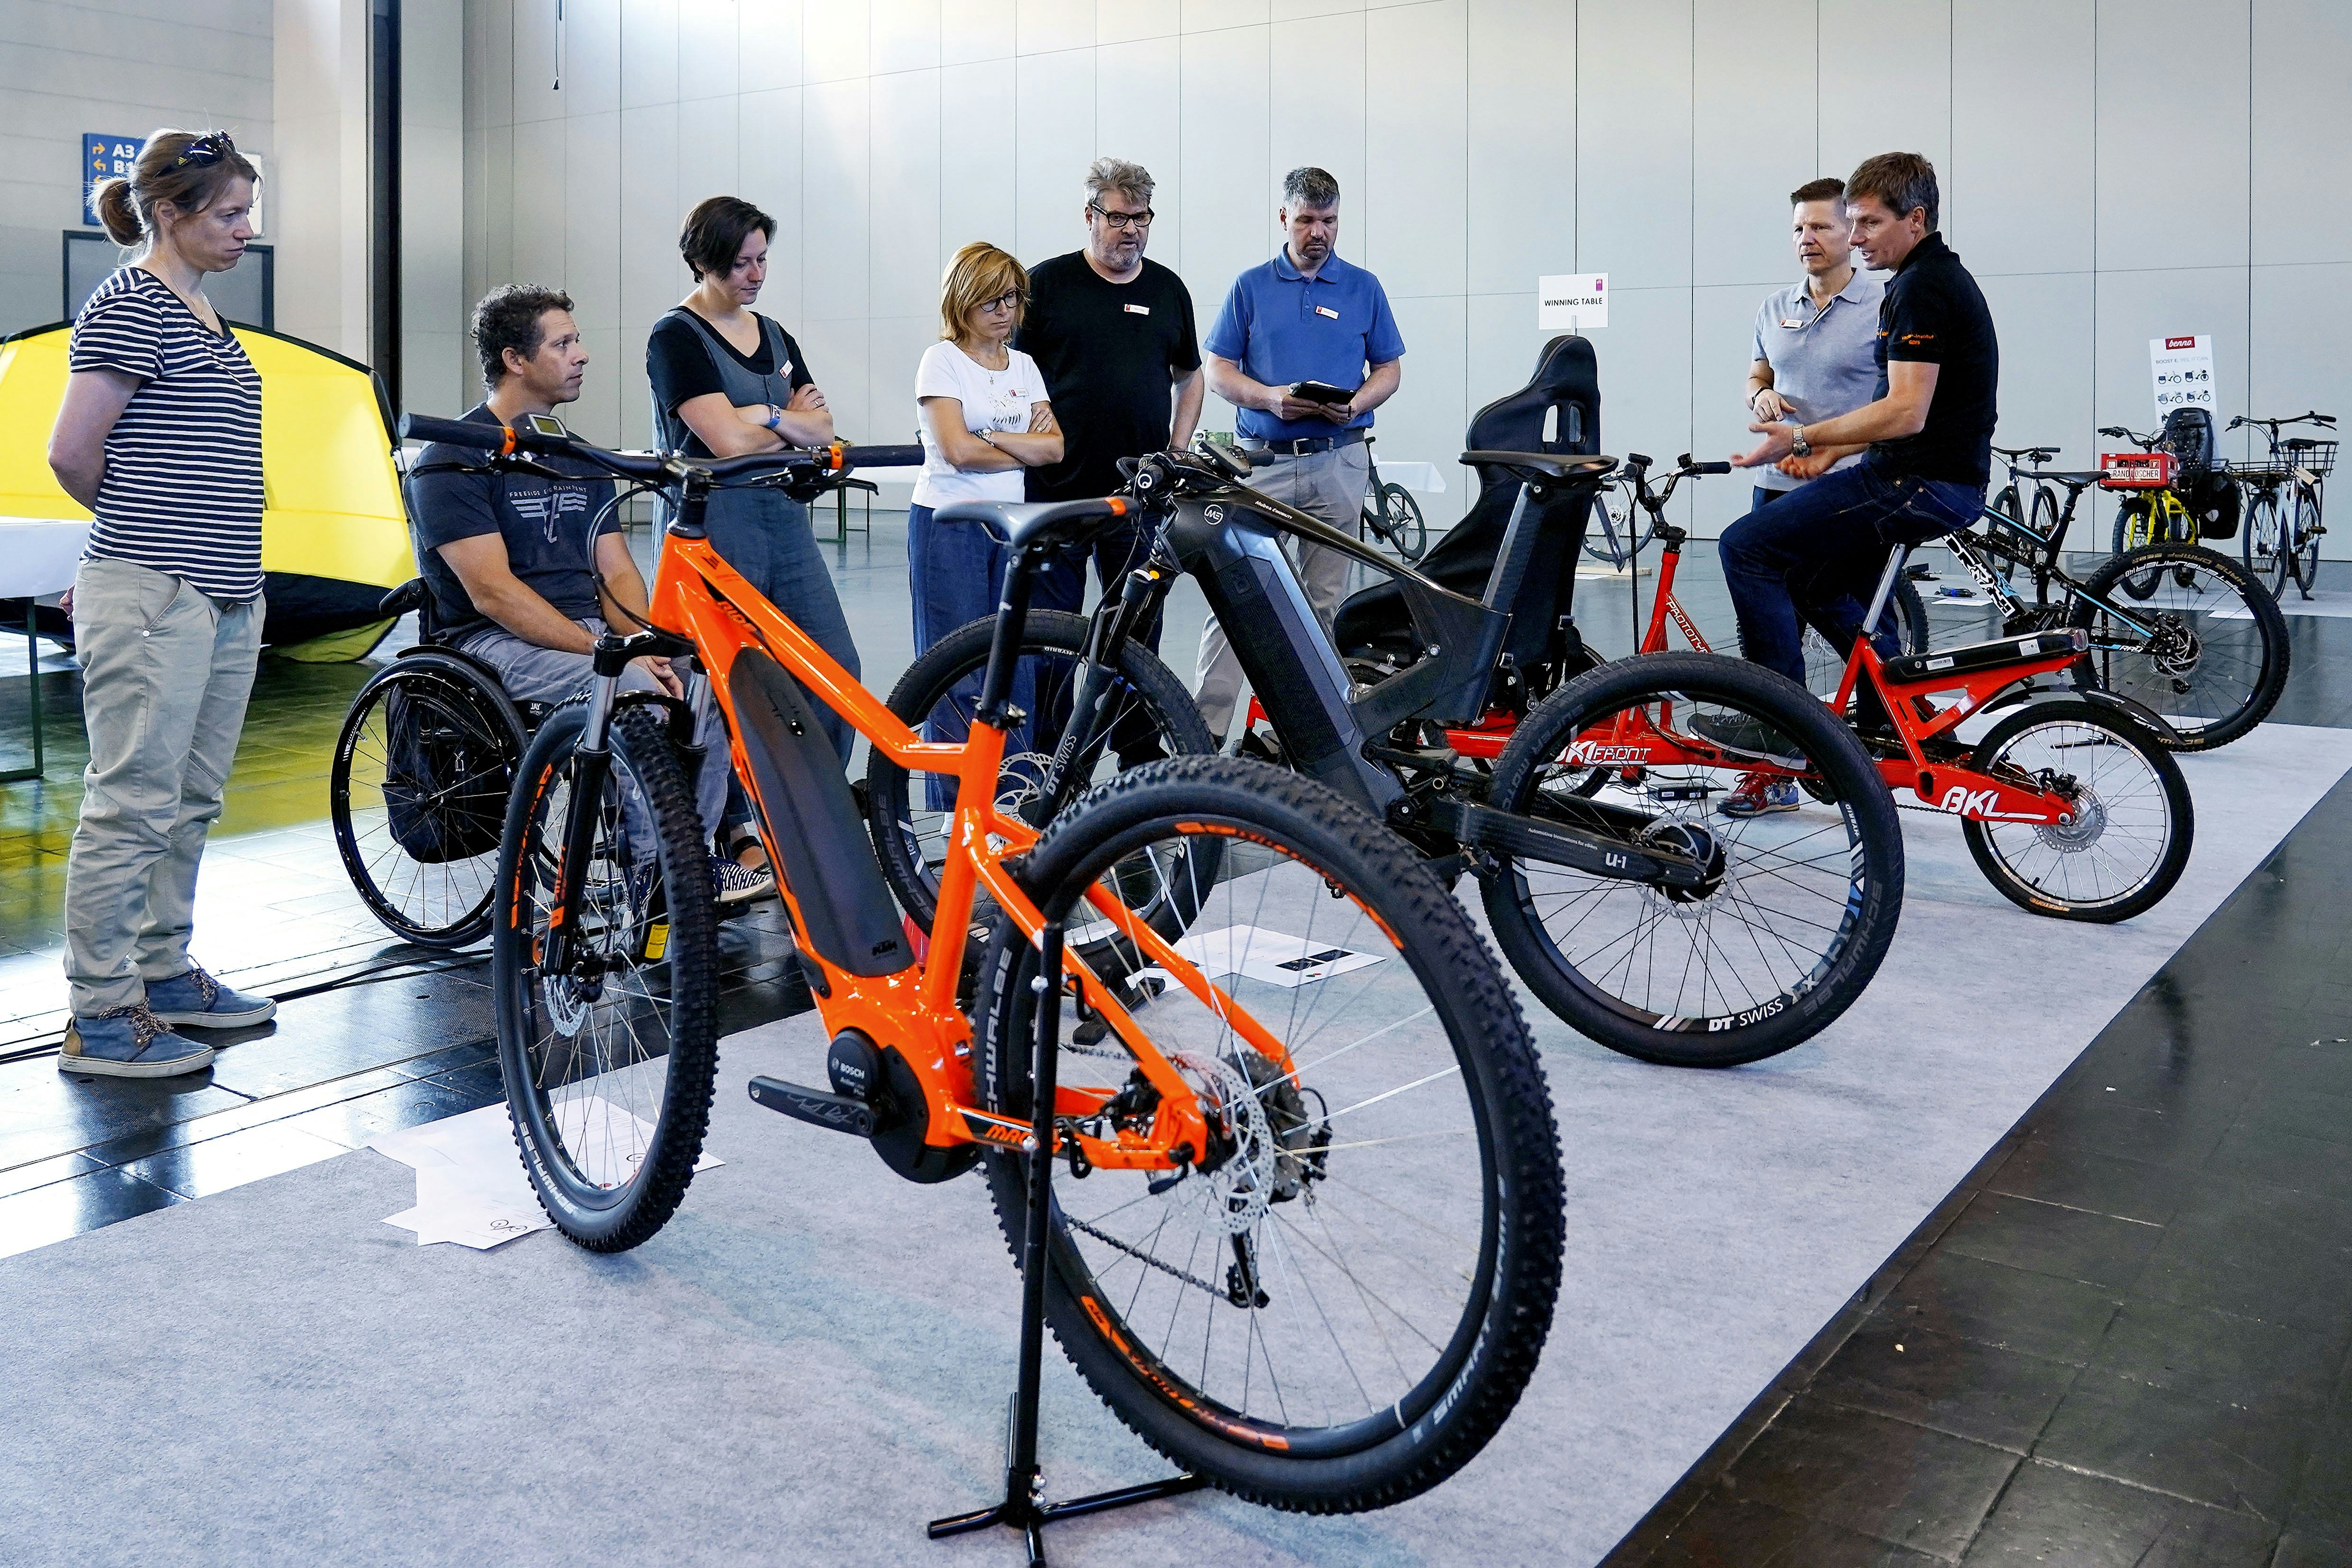 Eurobike Award winners are selected during a two-stage process by a twelve-person expert panel of judges. – Photo Eurobike